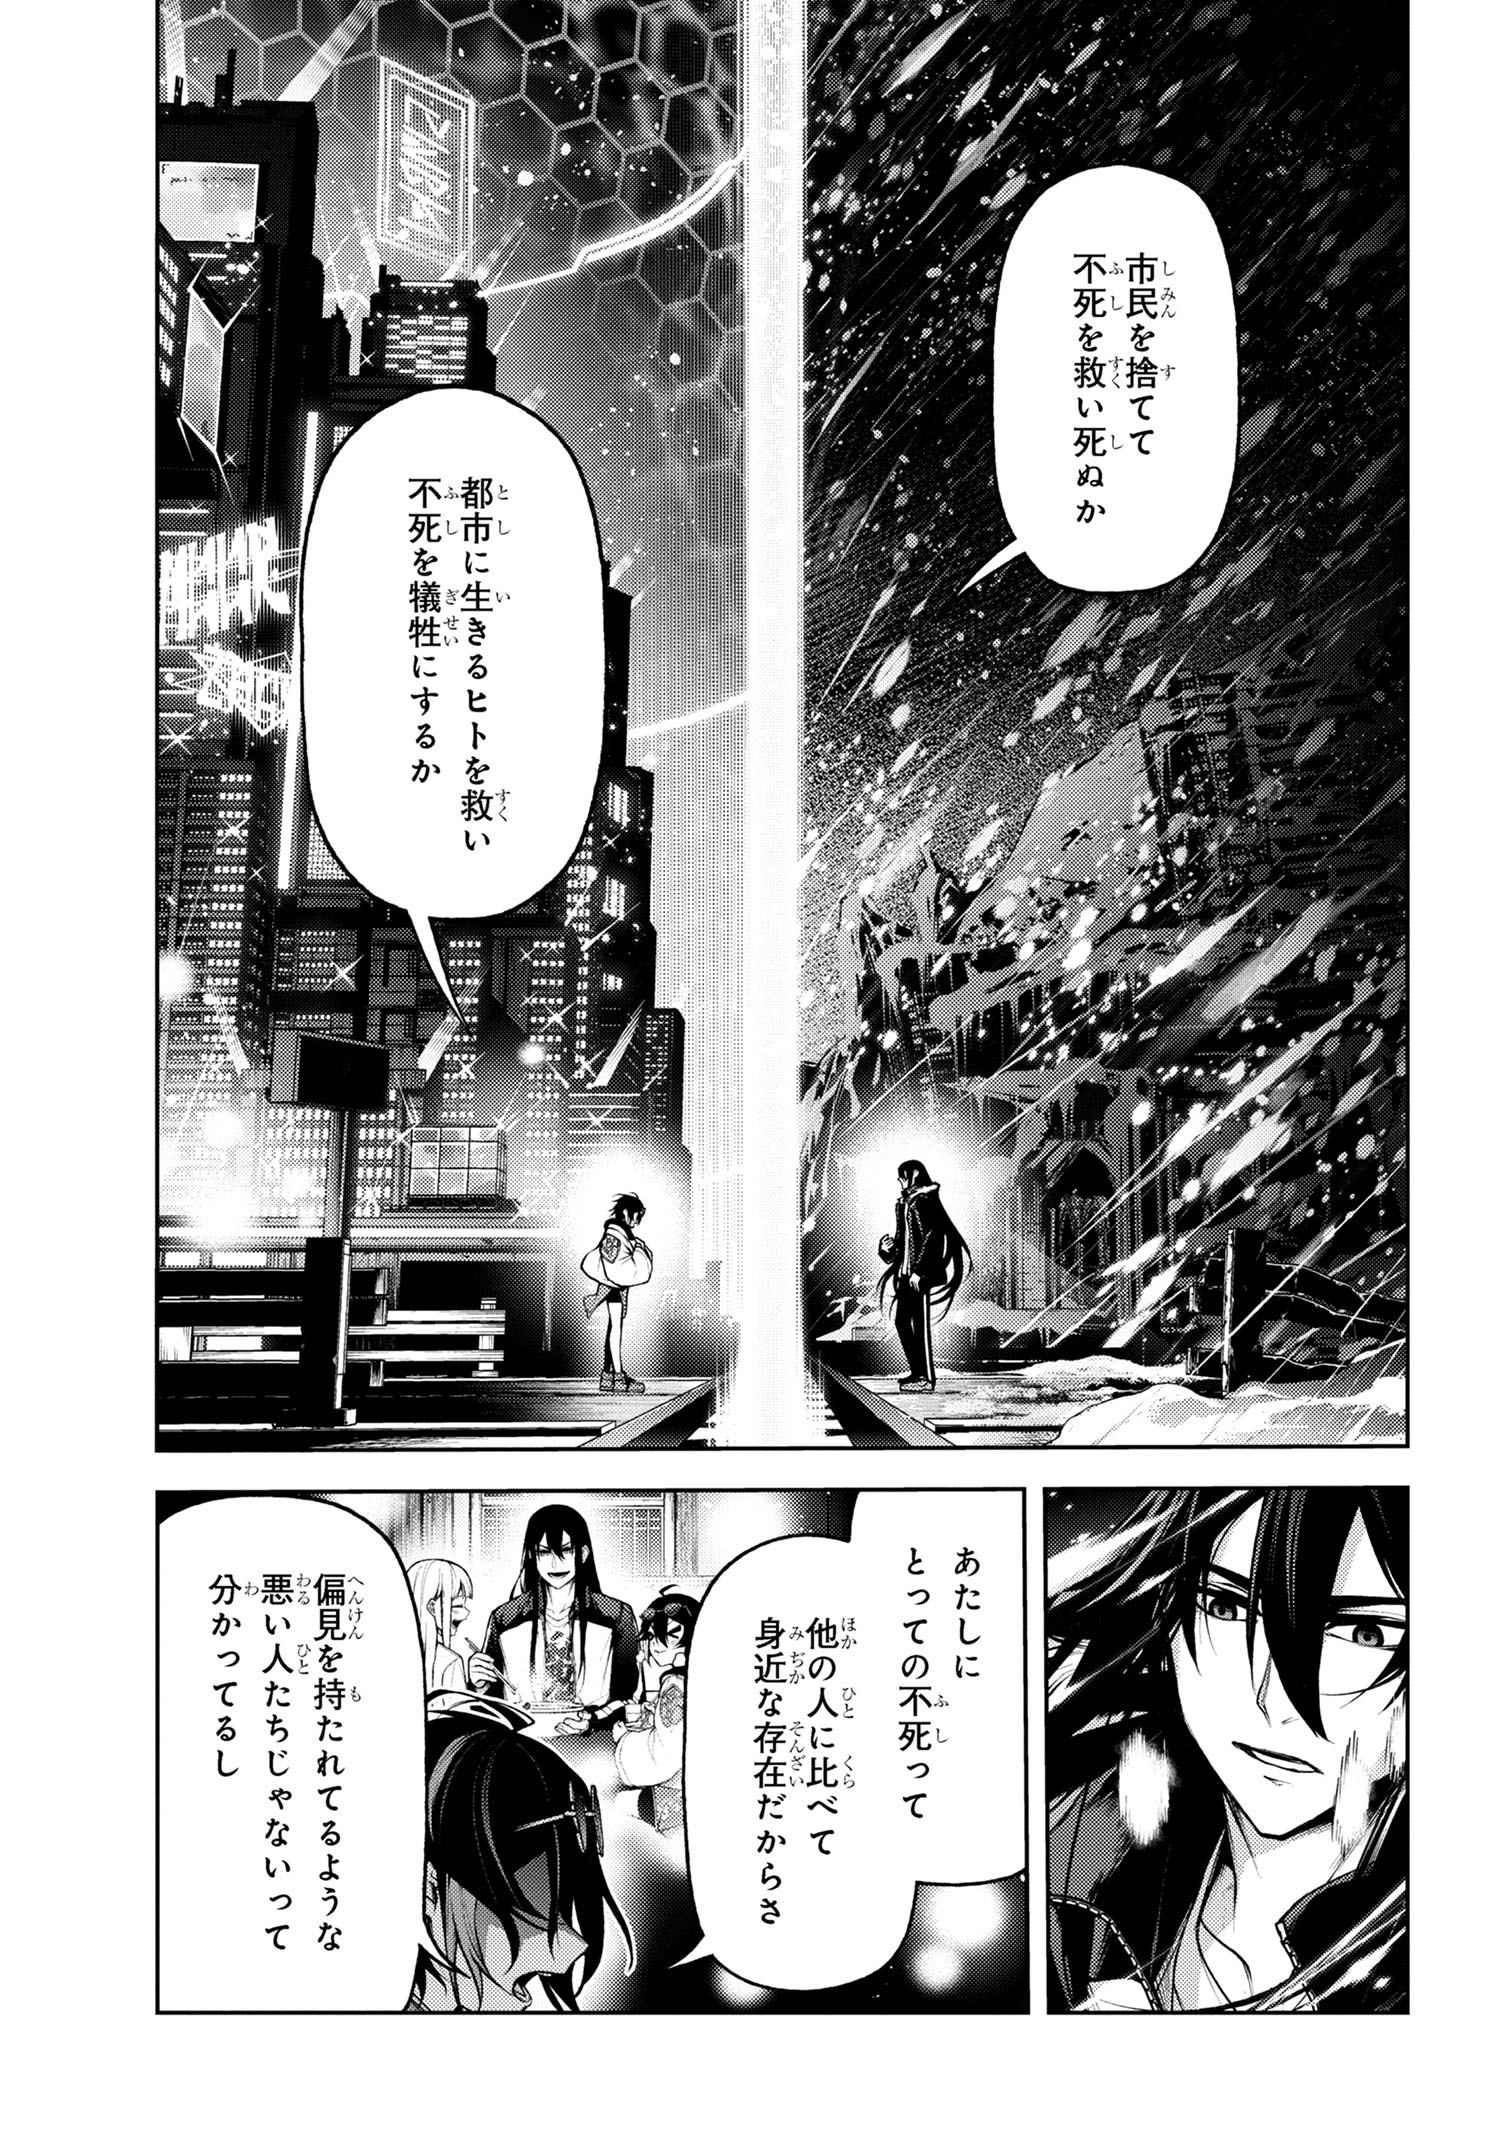 Maou 2099 - Chapter 7.3 - Page 6